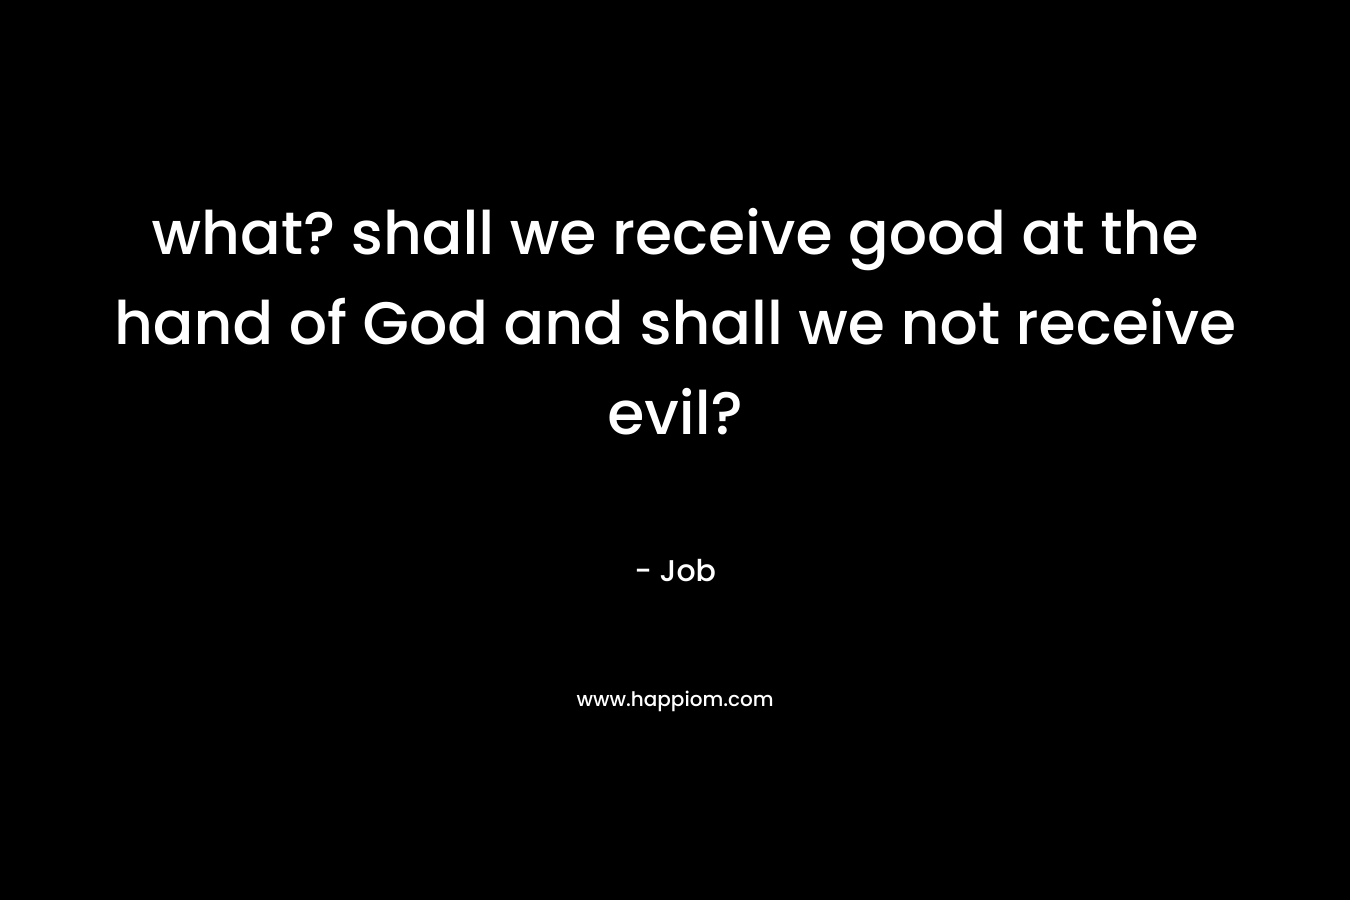 what? shall we receive good at the hand of God and shall we not receive evil?